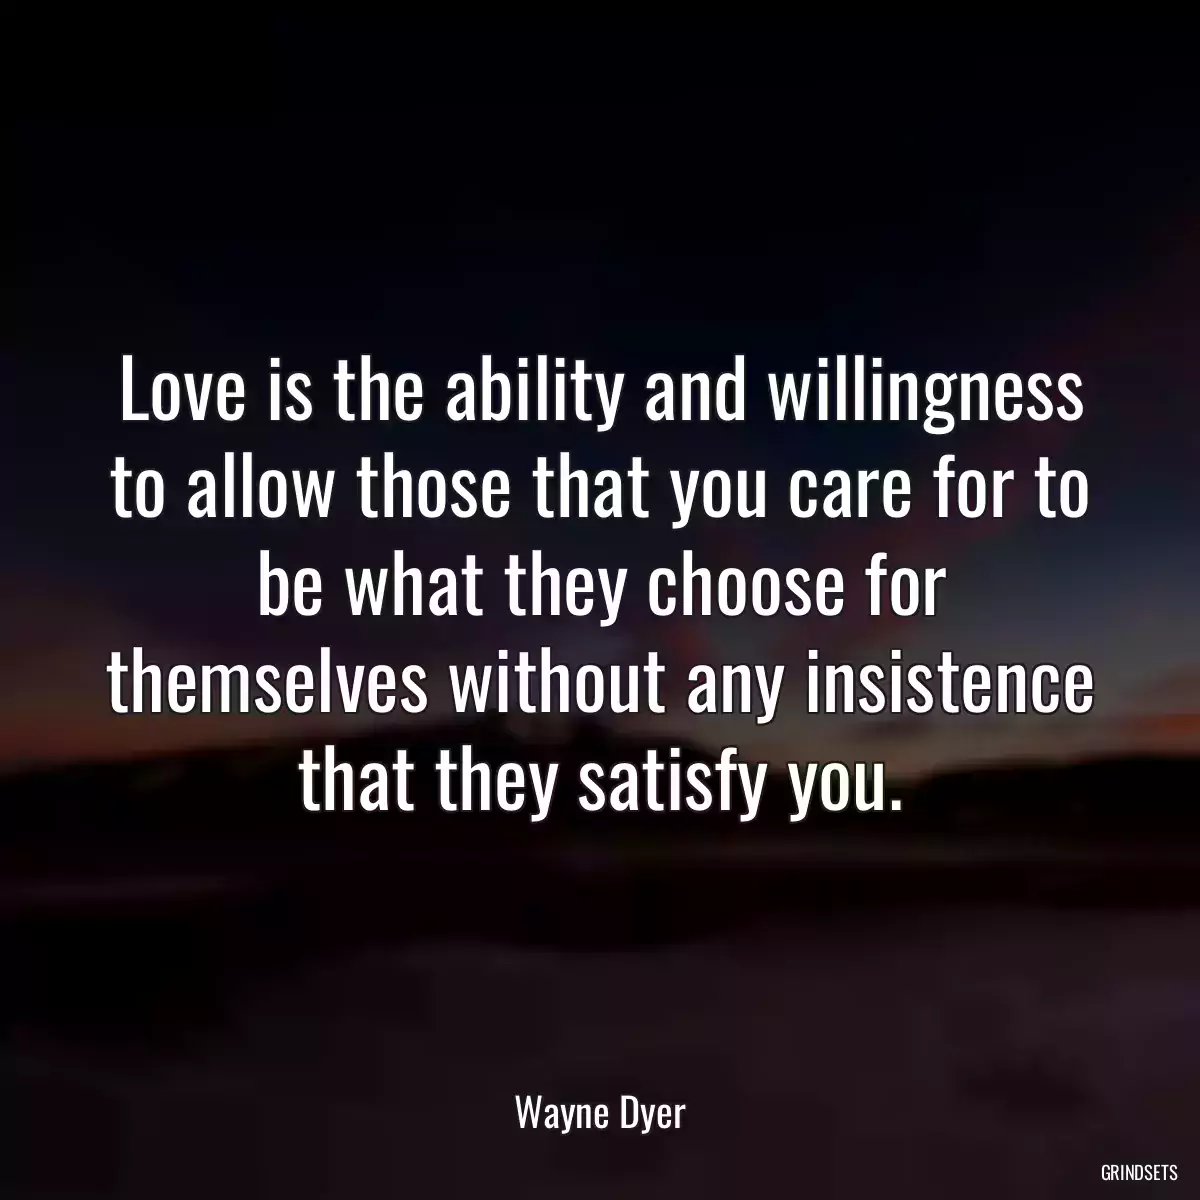 Love is the ability and willingness to allow those that you care for to be what they choose for themselves without any insistence that they satisfy you.